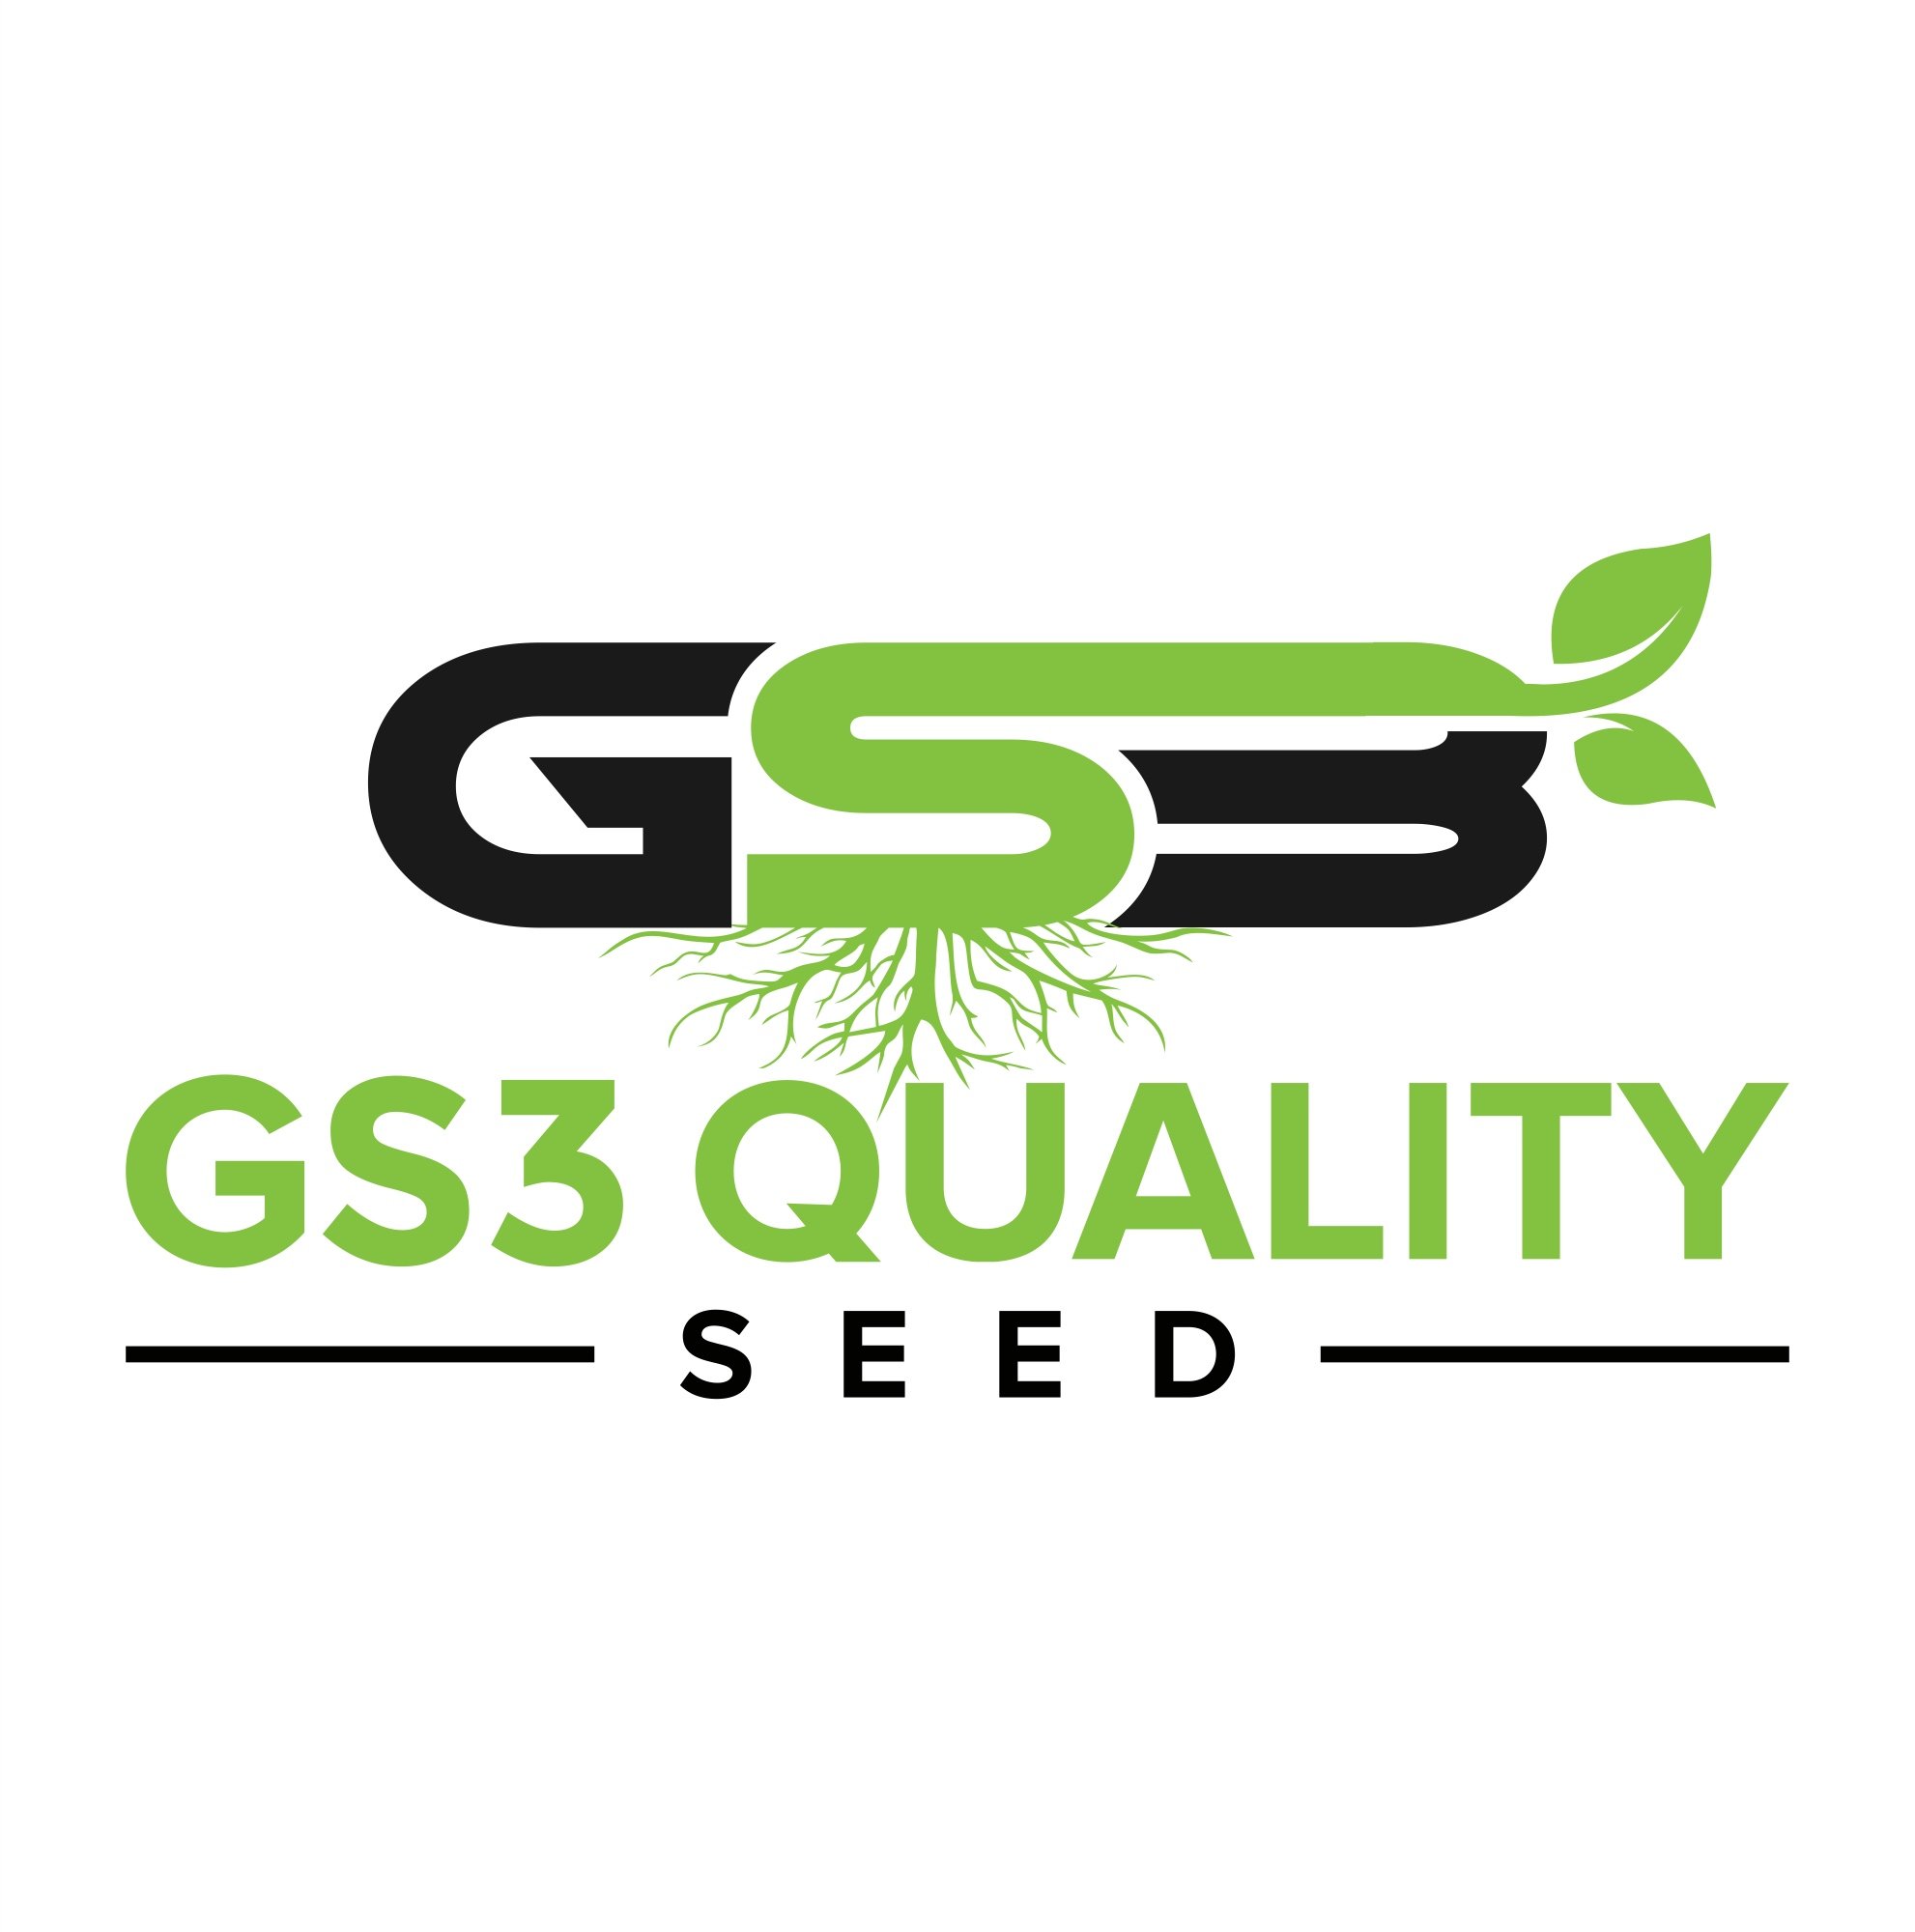 GS3 Quality Seed